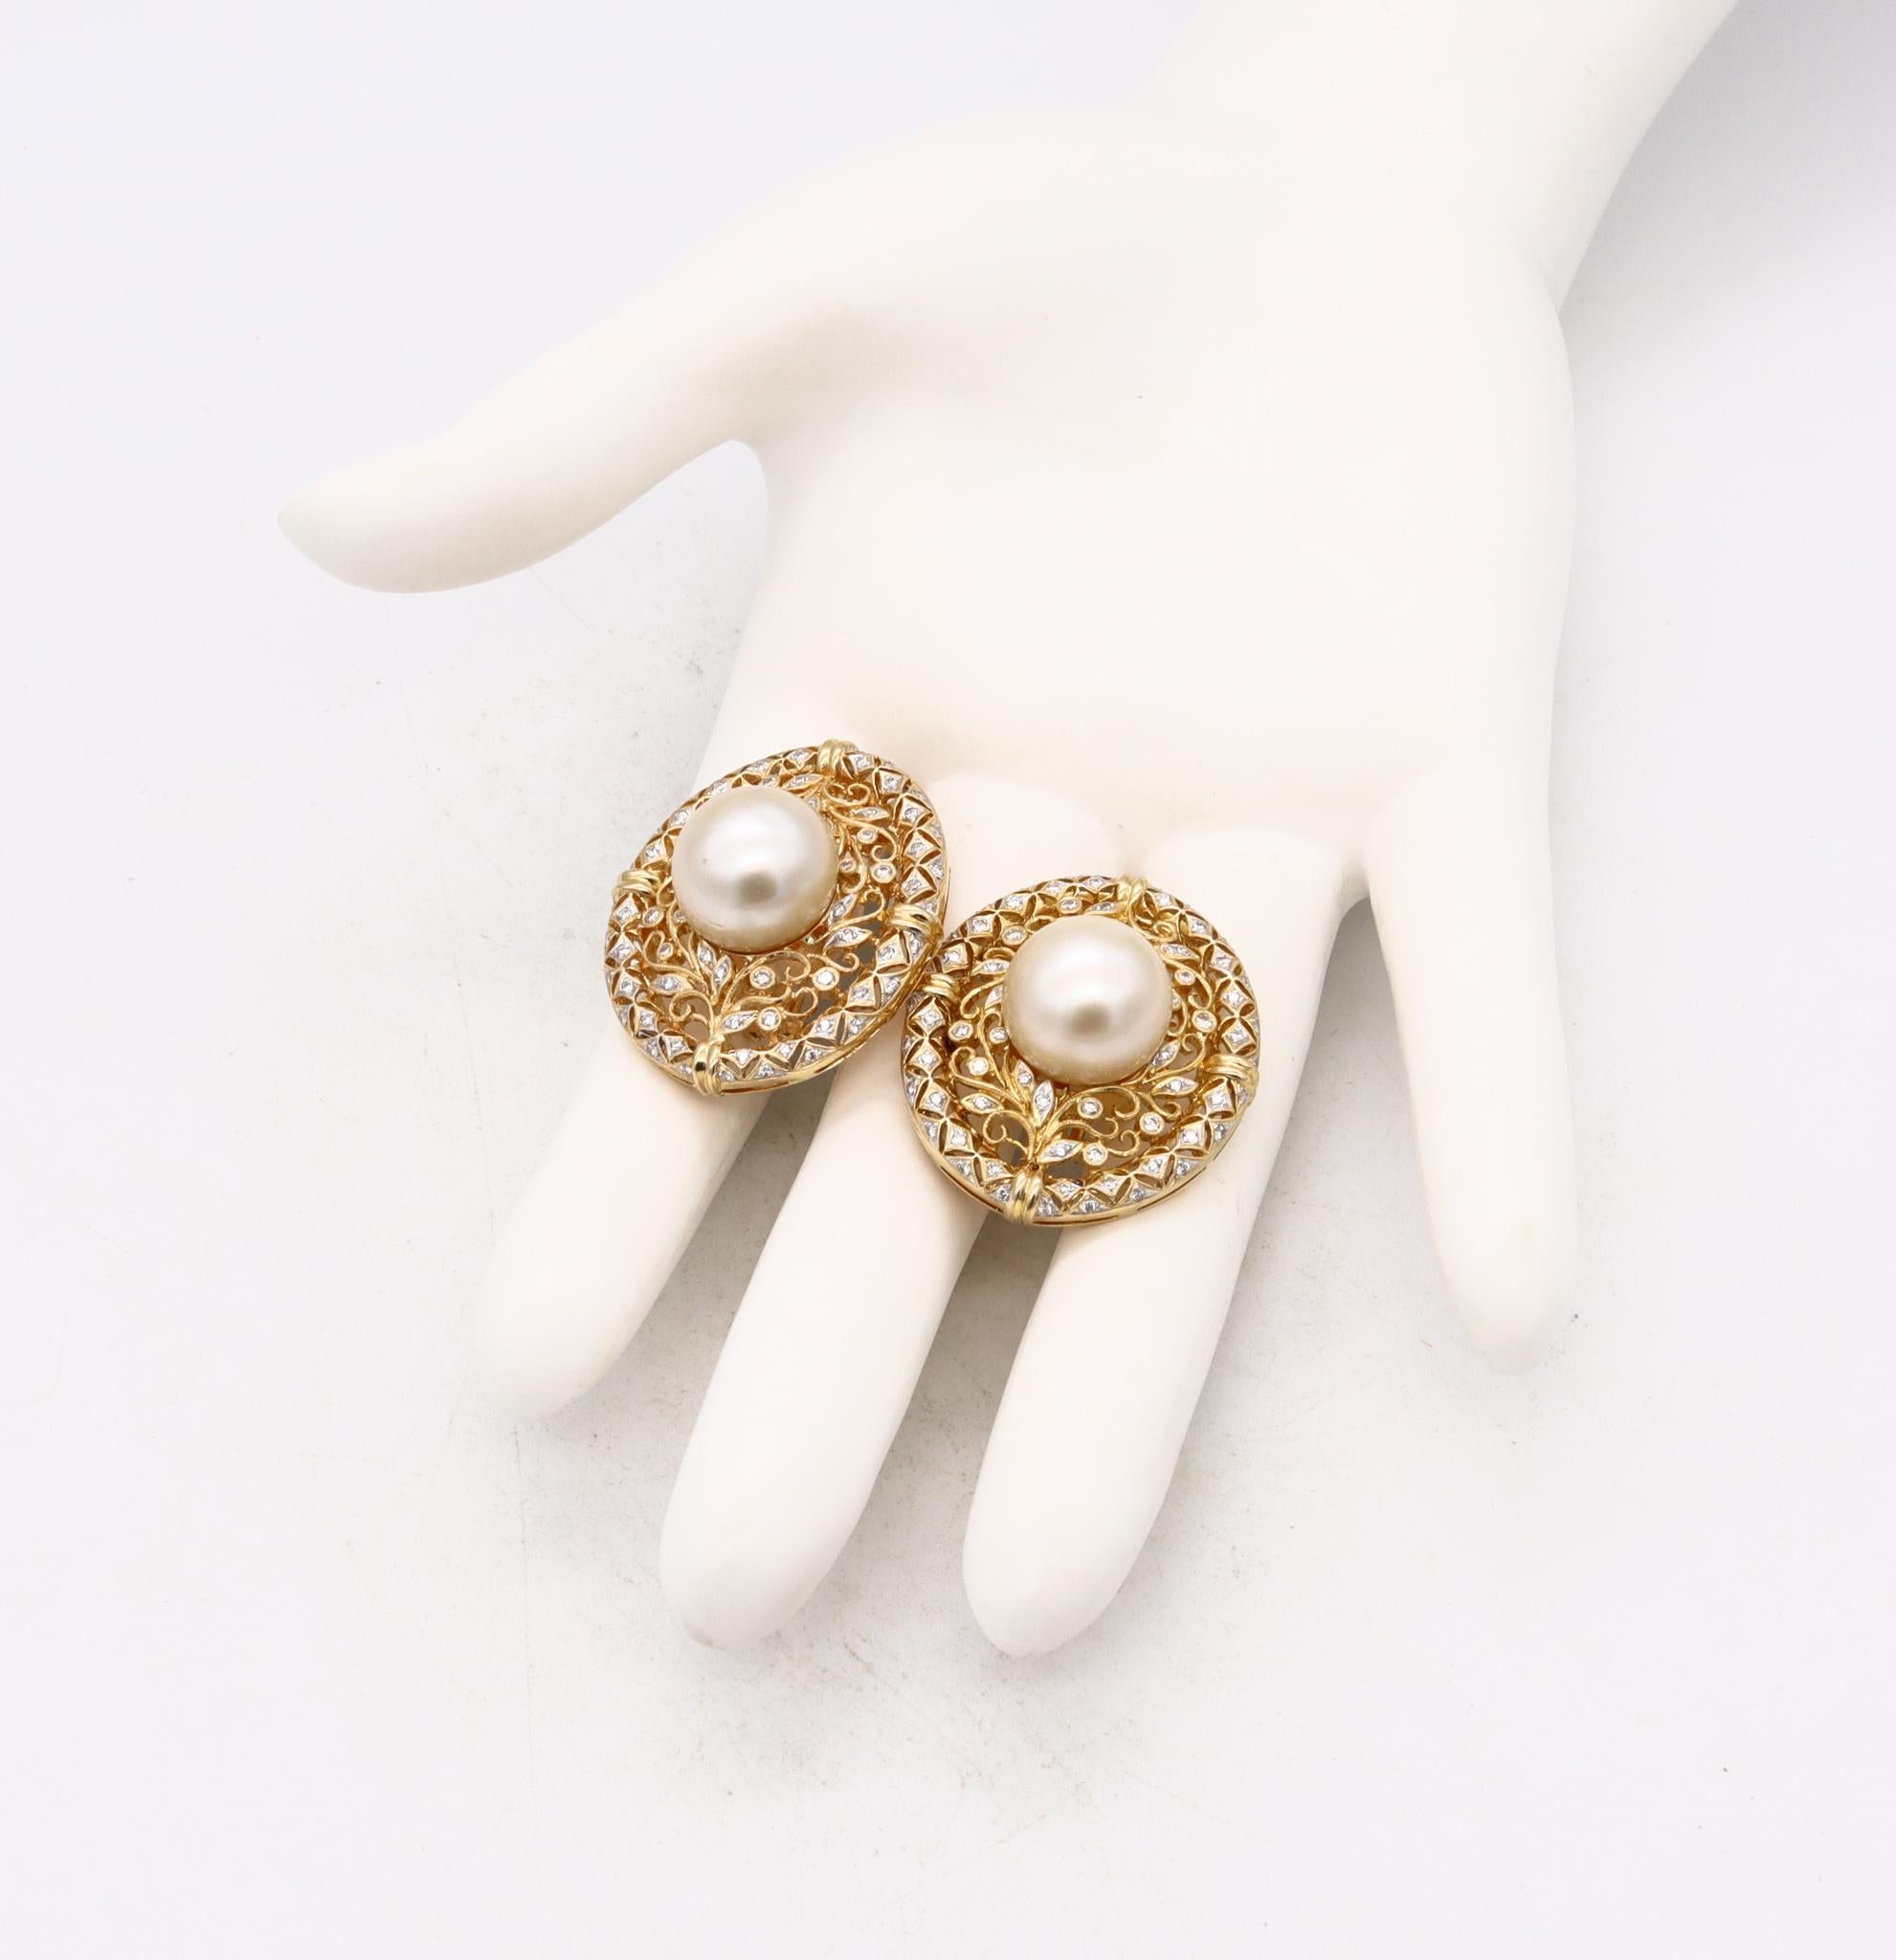 Classic cluster earrings with South Sea Pearls. 

Gorgeous Italian designers pair of gem set cocktail earrings, carefully crafted in solid yellow gold of 18 karats. Designed with an intricate micro textured organic patterns and suited with posts